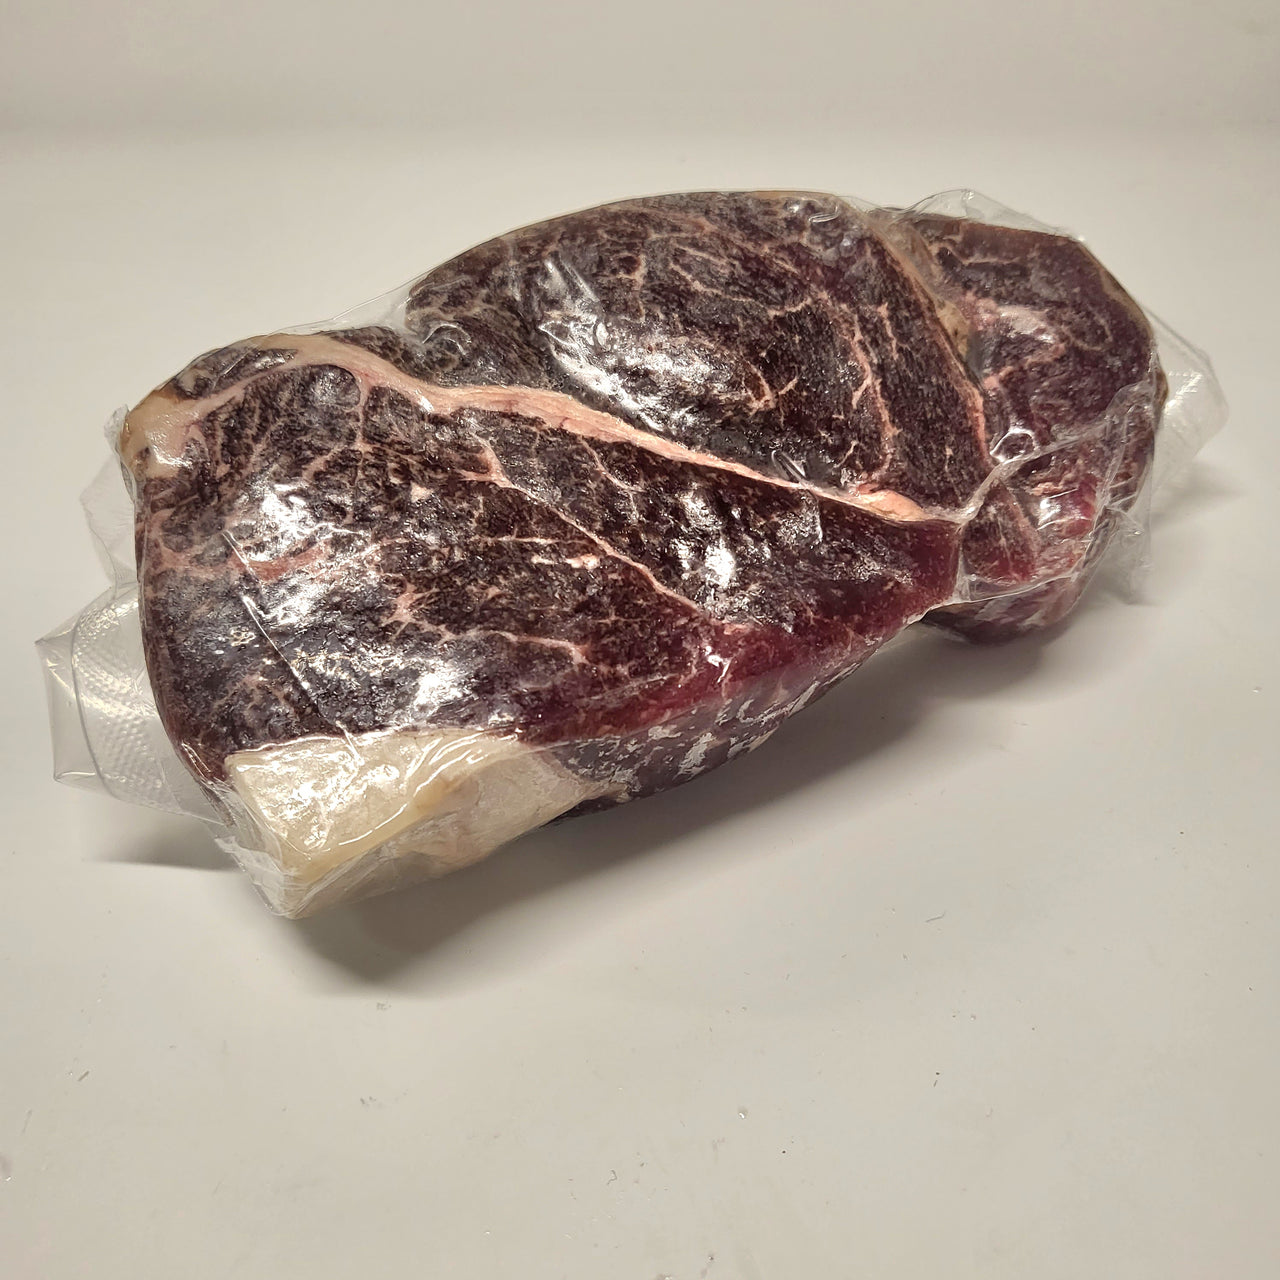 Grass Fed Grass Finished Beef Chuck Steak  Japanese Black Wagyu Beef Full Blood NOT AGED